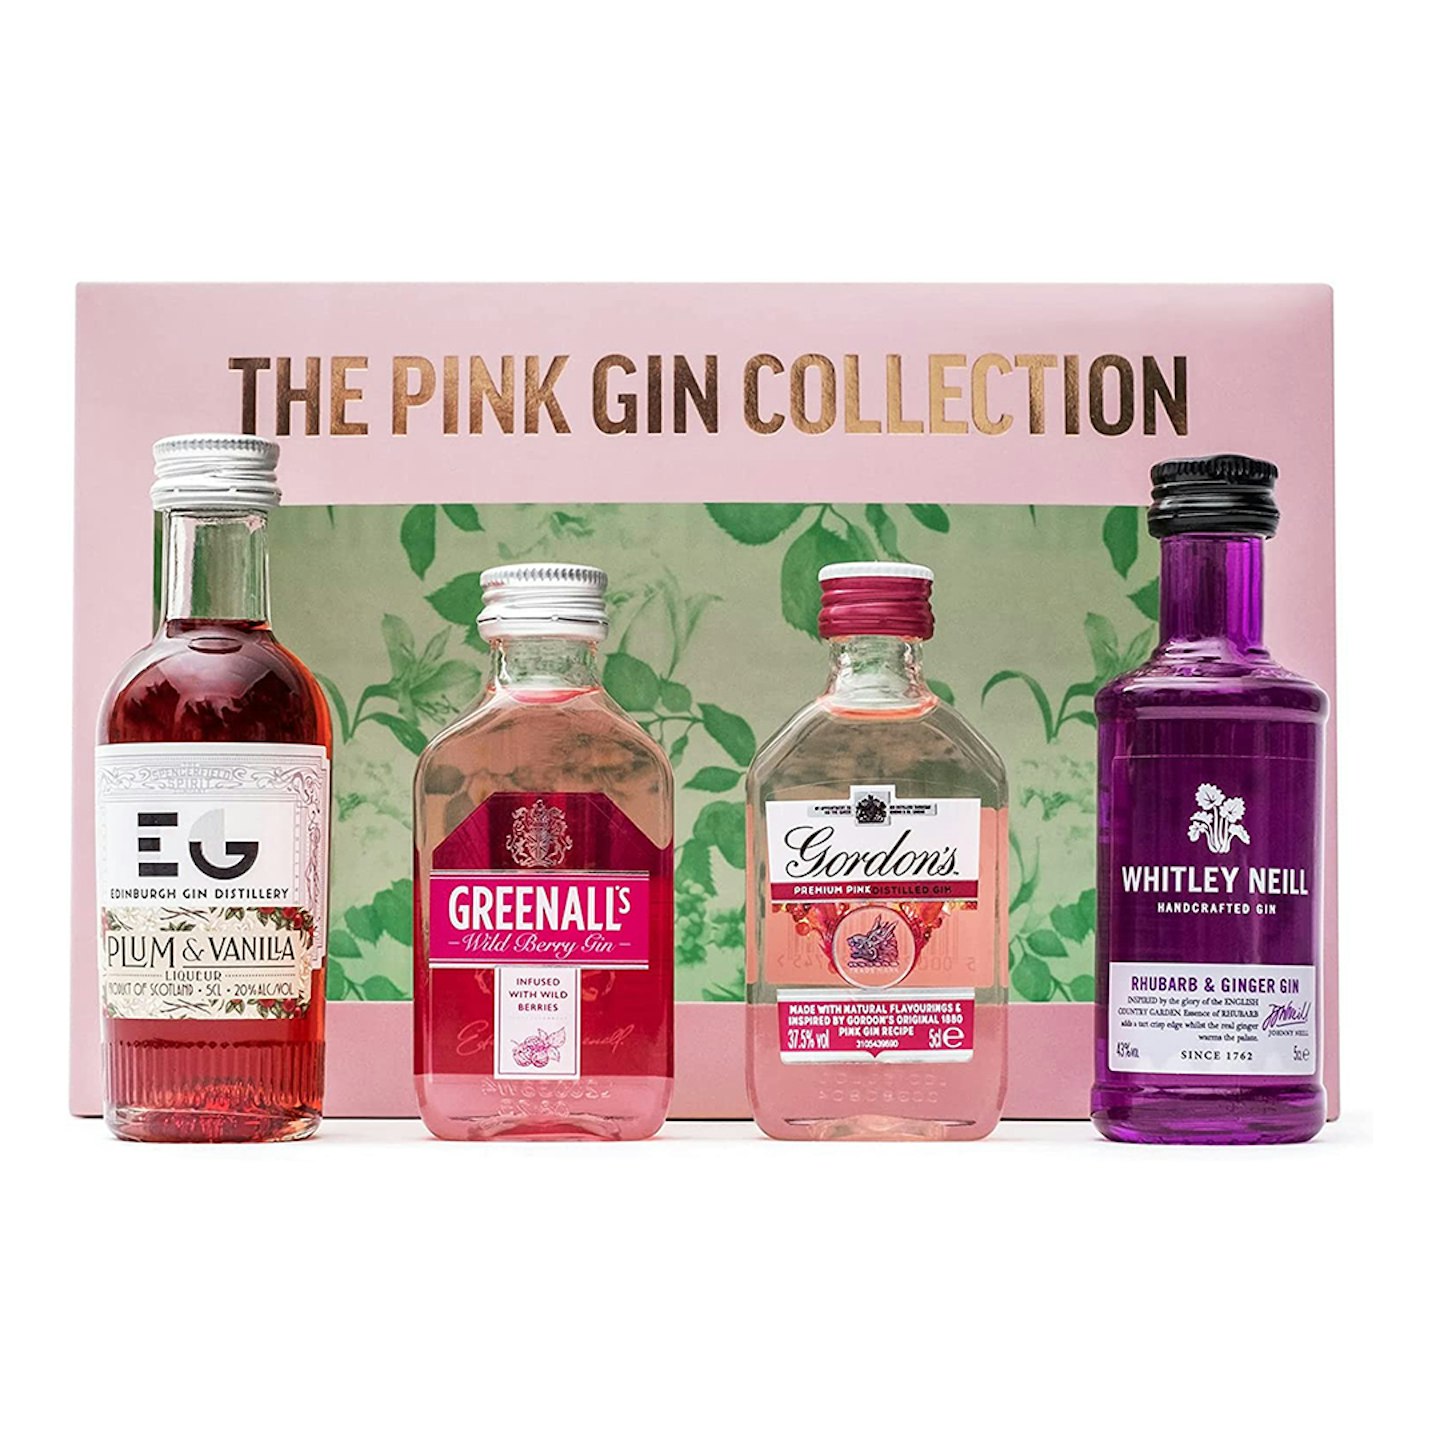 The Pink Gin Collection